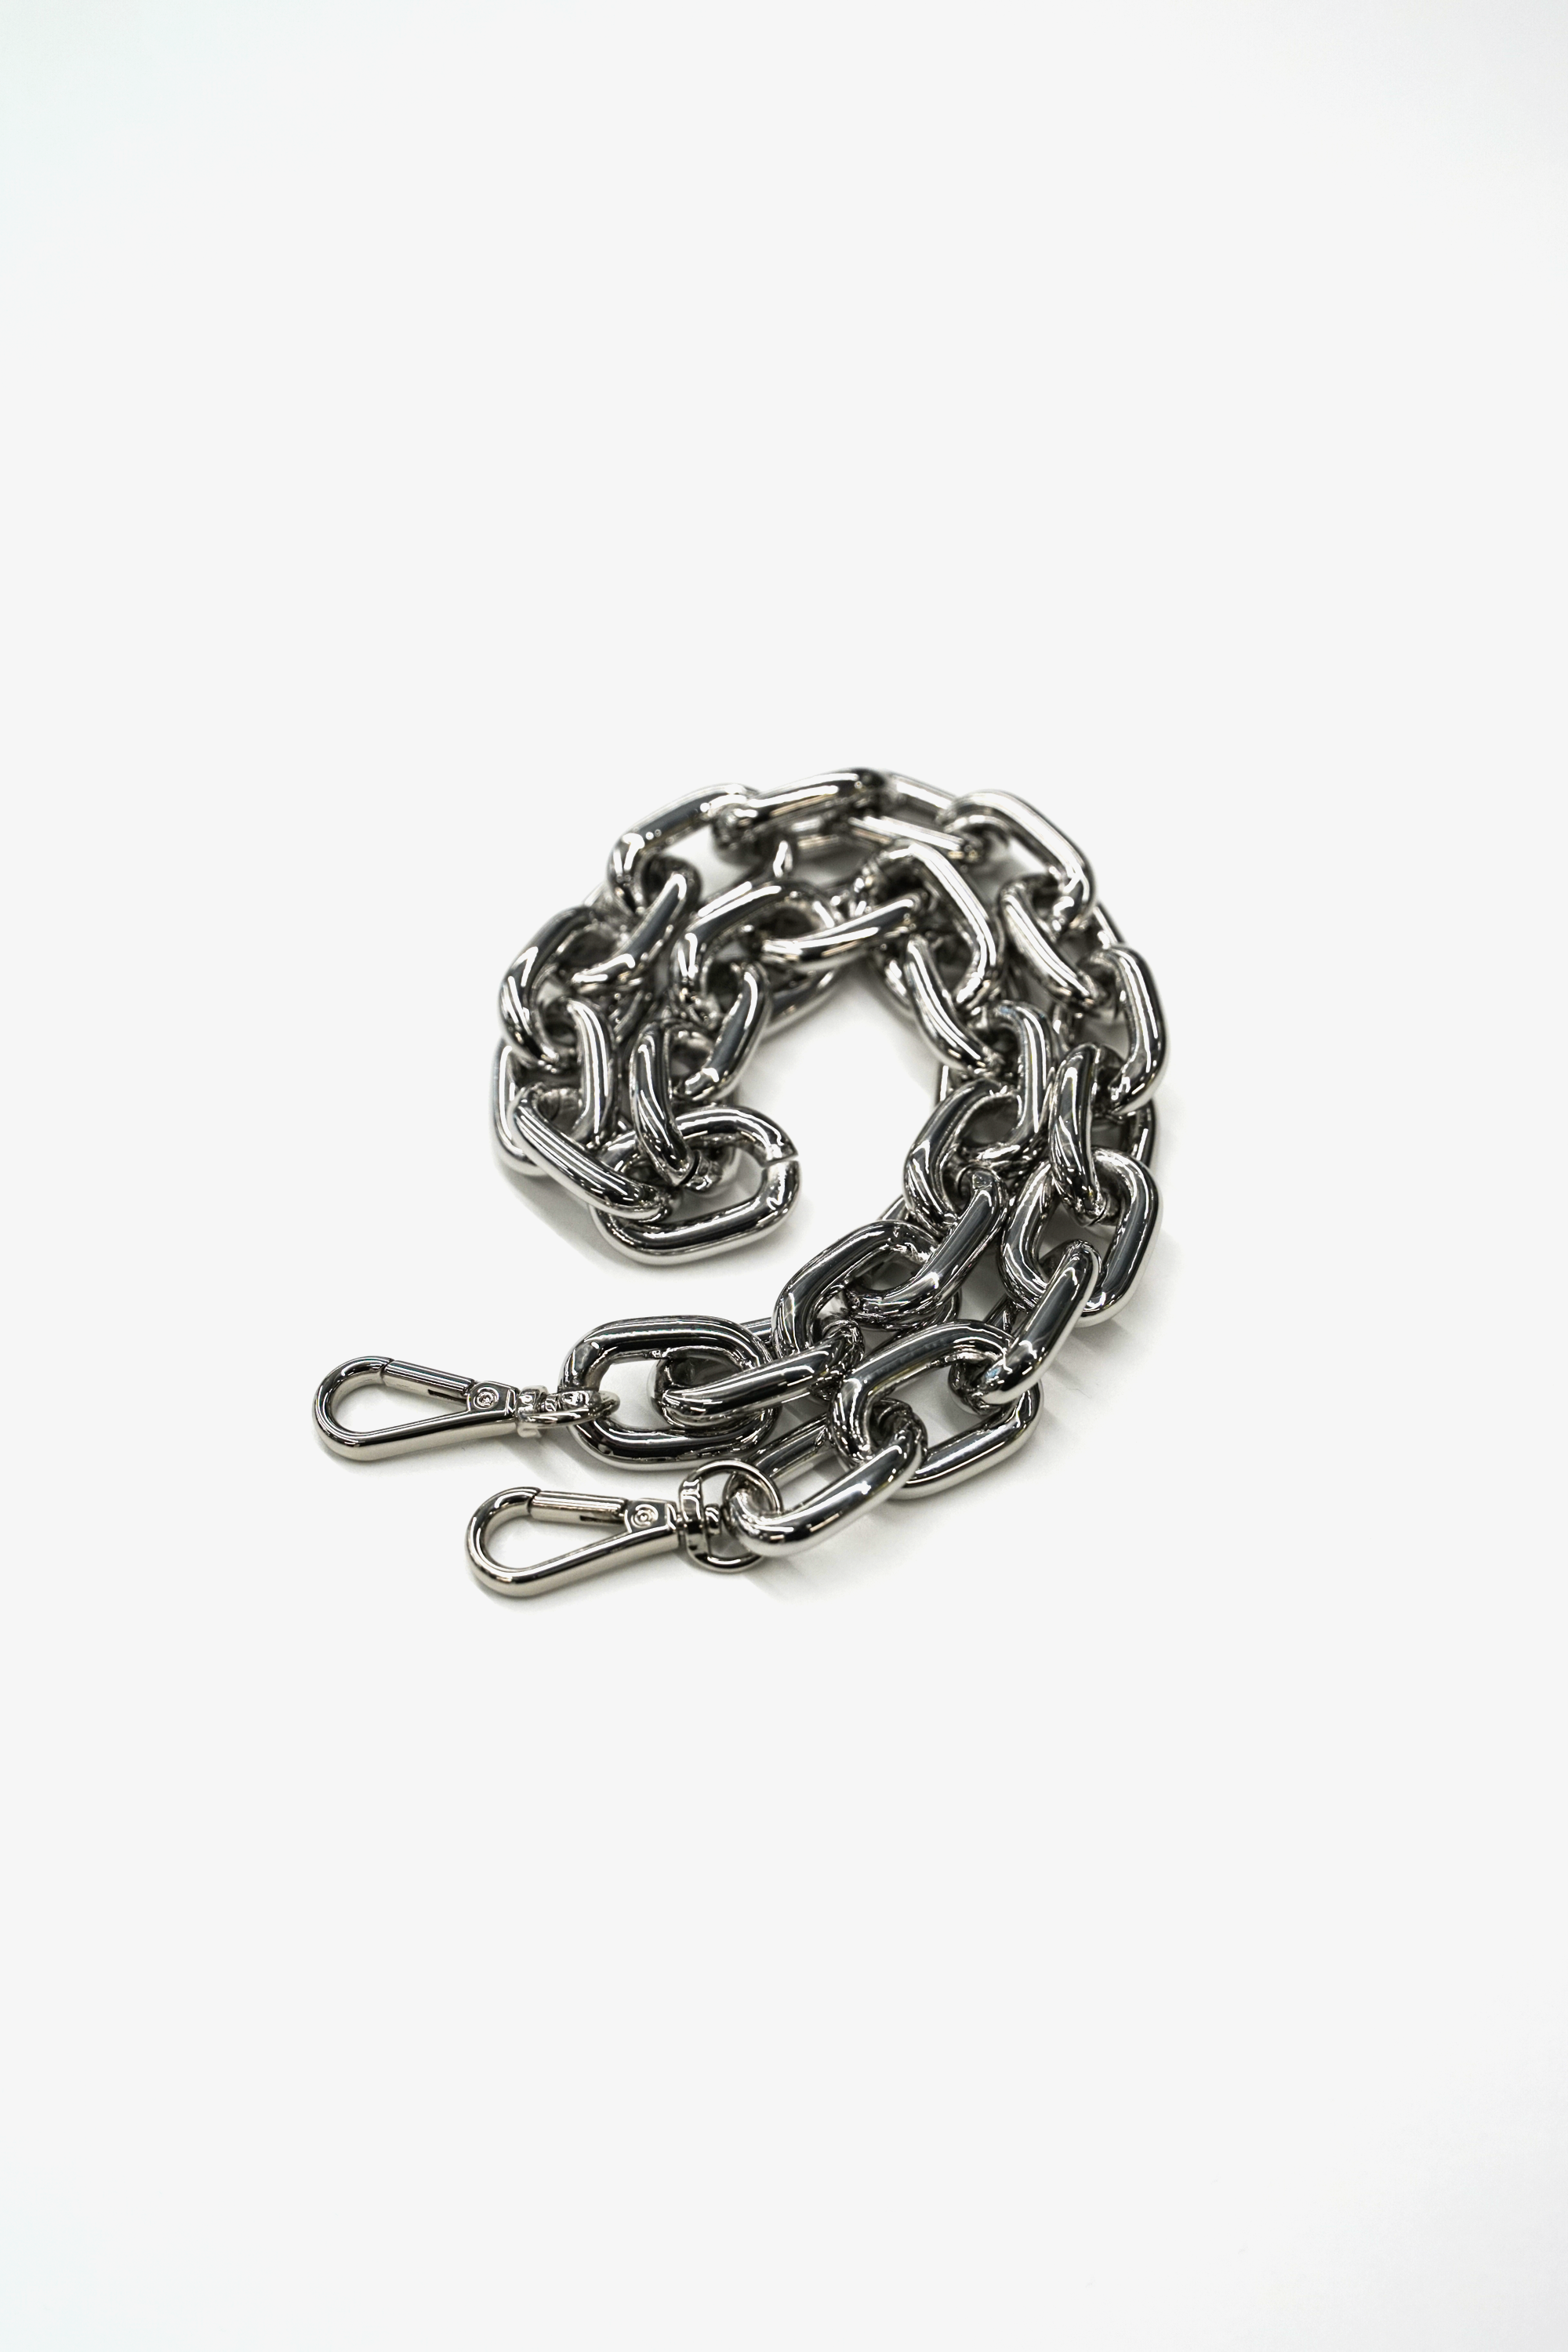 T+M Chunky Link Chain / Shoulder Strap Silver